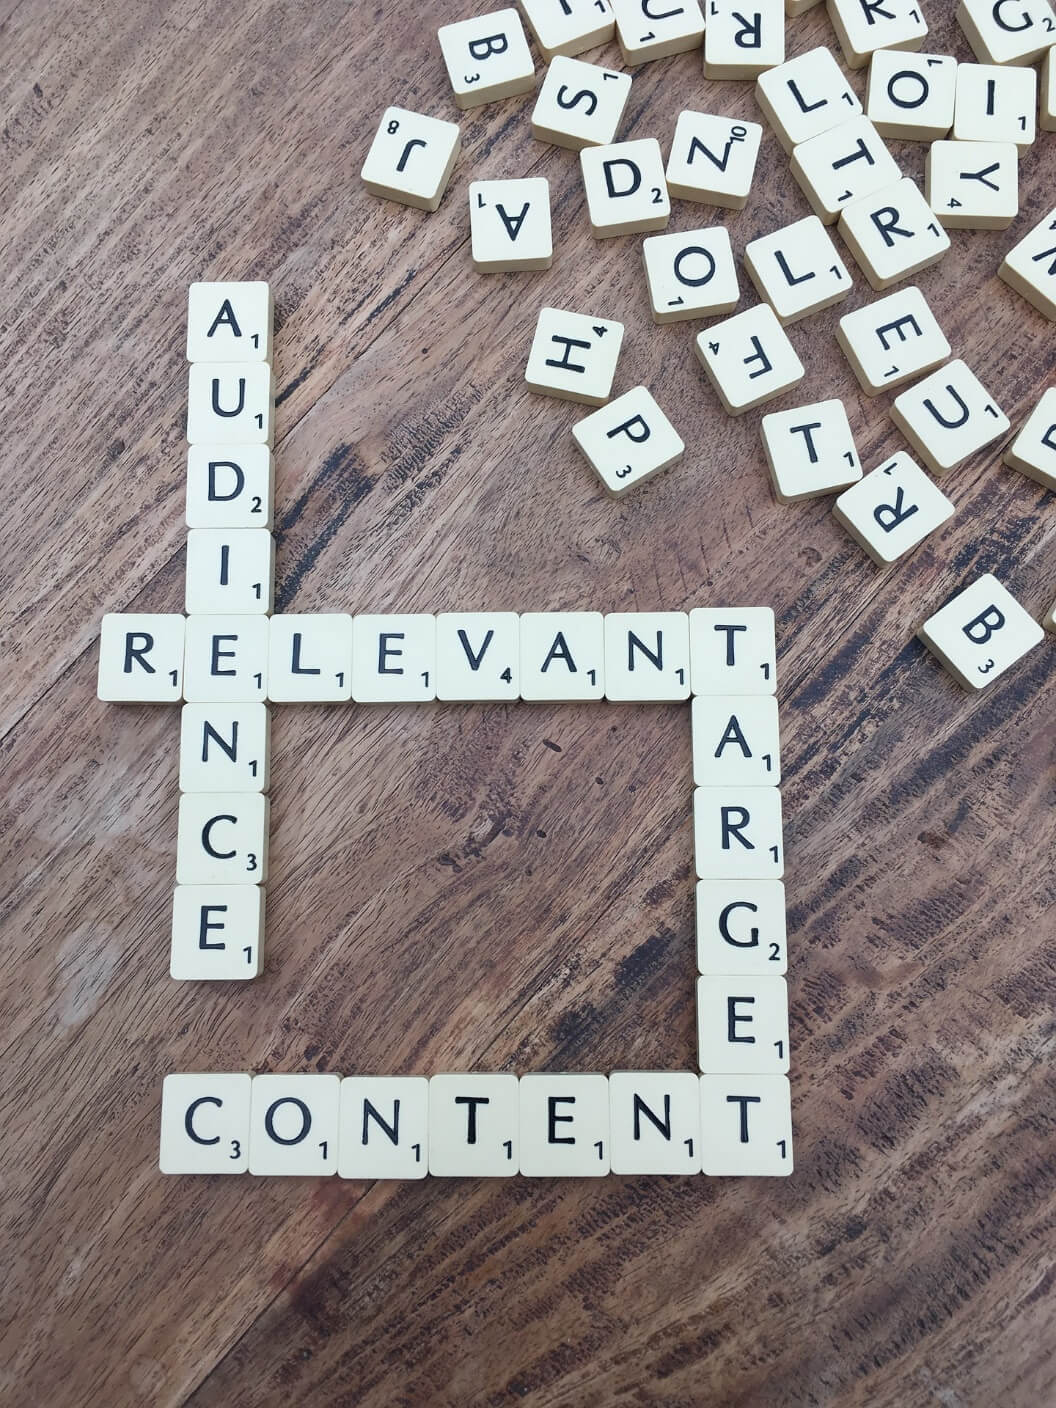 content marketing mistakes 2019